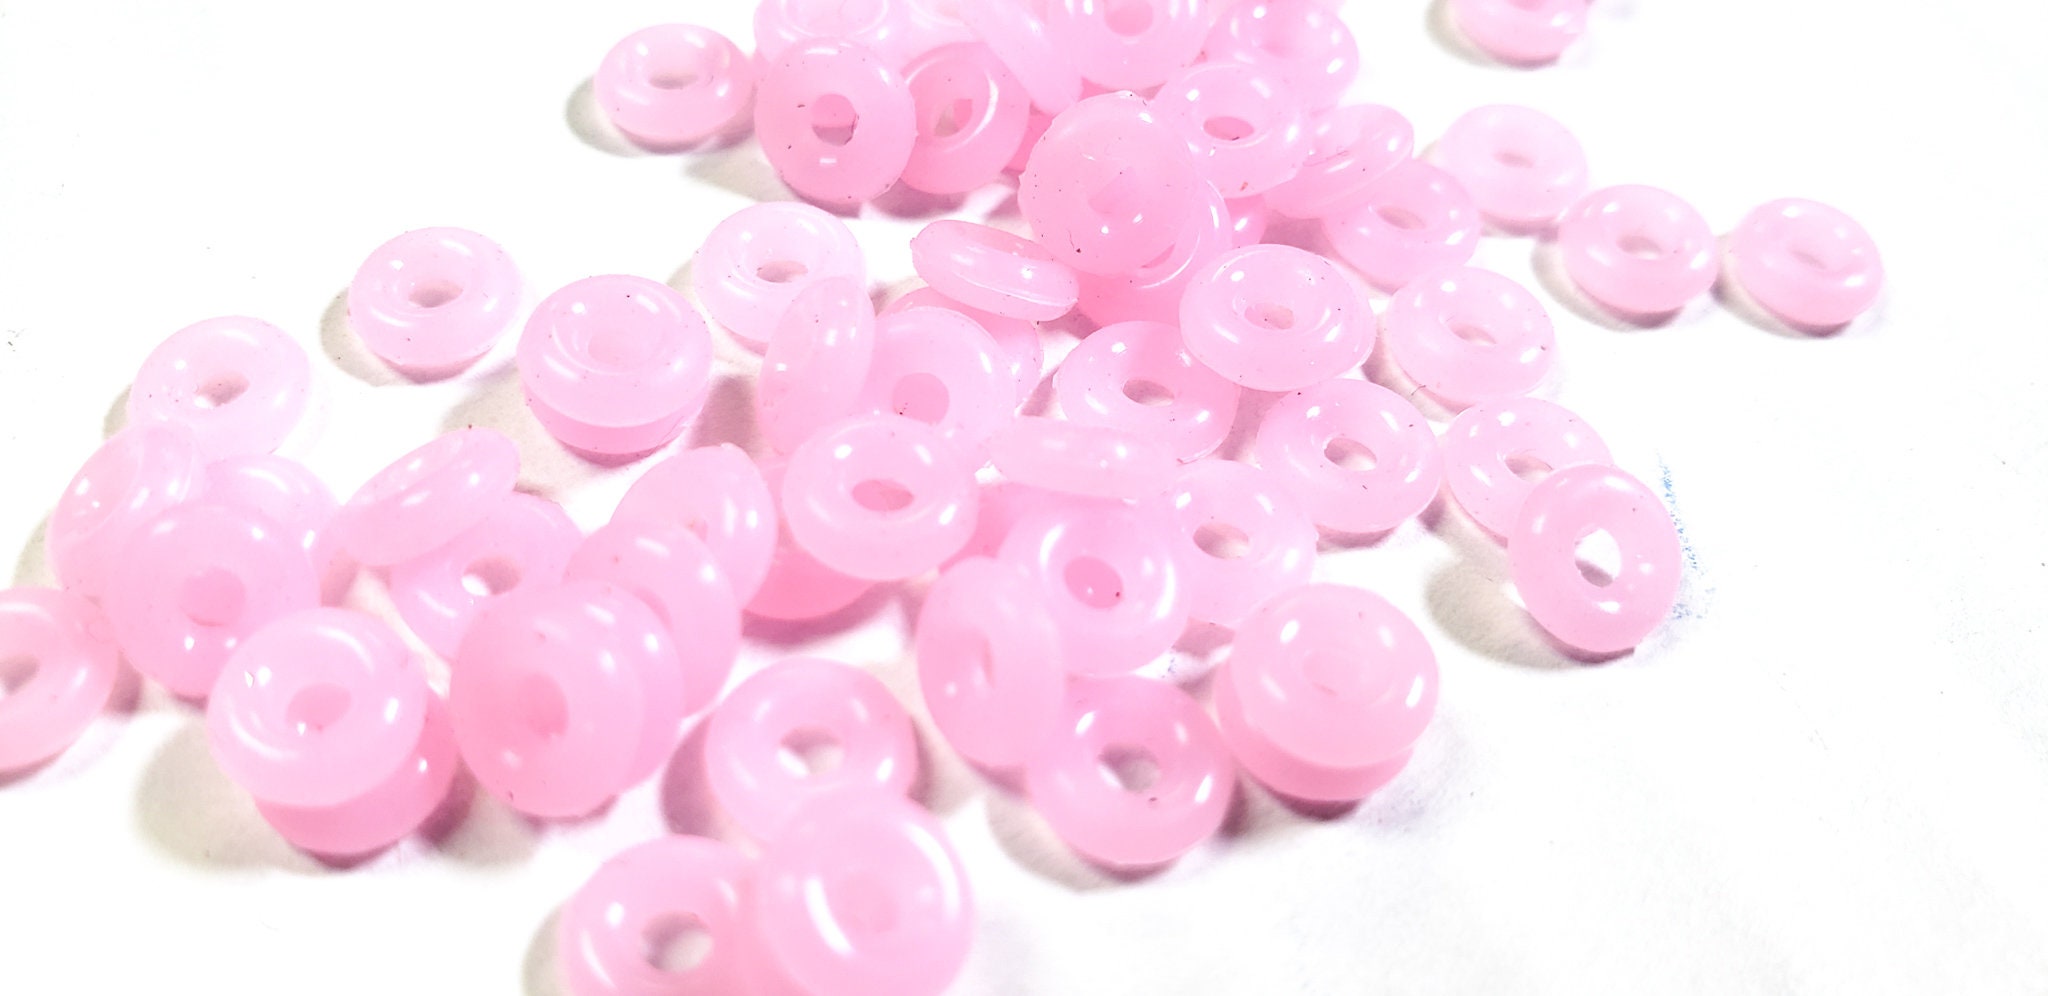 20 Fuchsia Pink Silicone Rubber Stopper Rings for European Bracelets Safety Stop 6mm Findings 44C